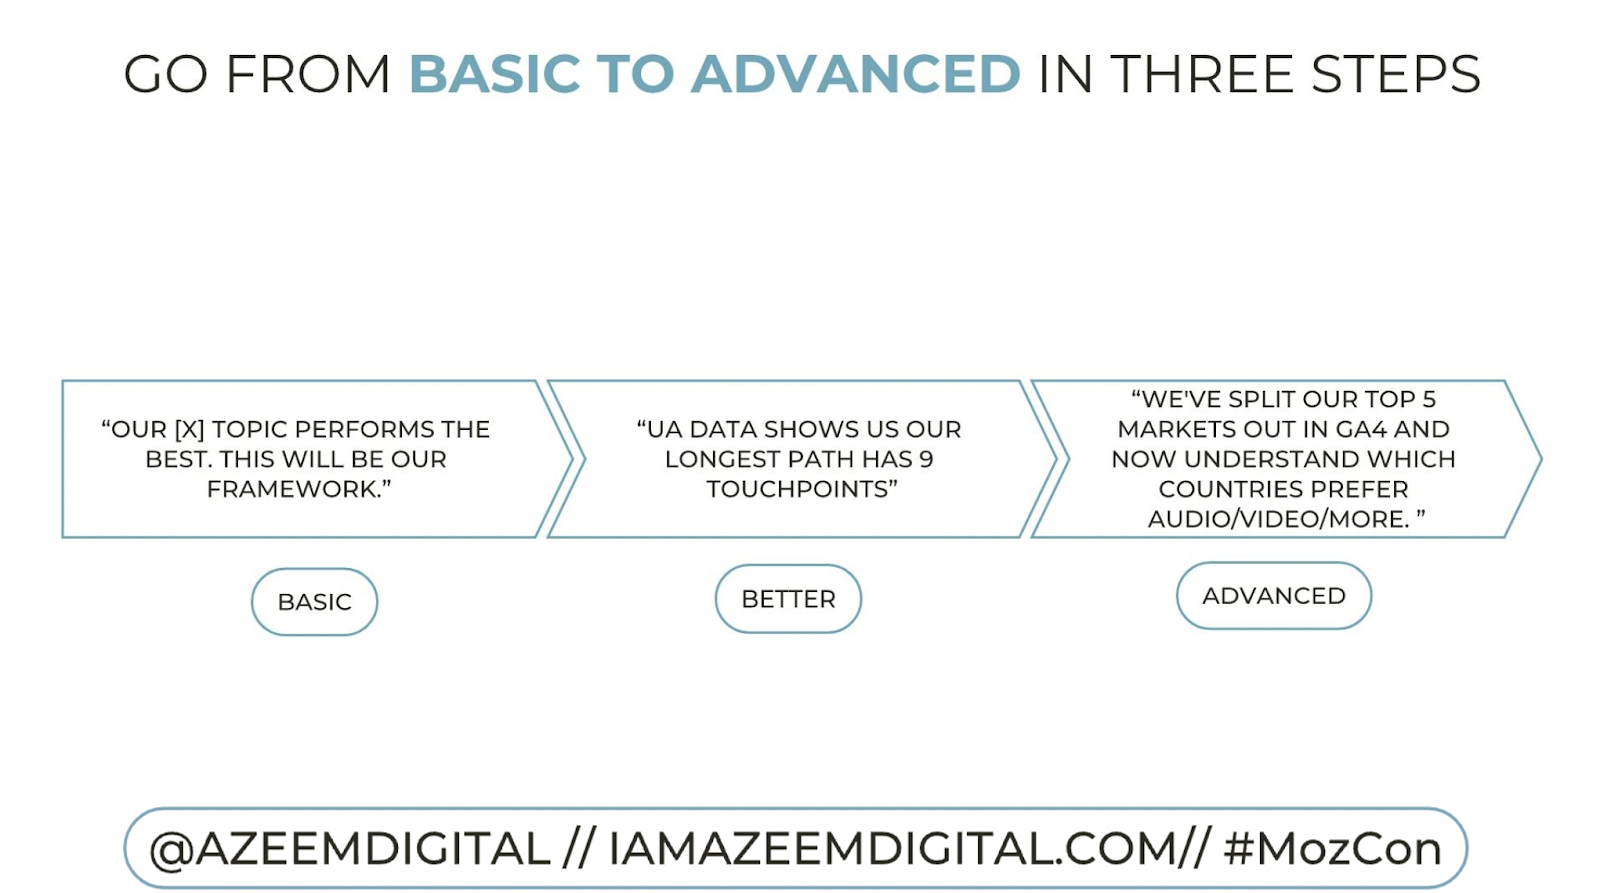 An image from Azeem's MozCon slide deck. Go from basic data analysis to advanced in three steps.